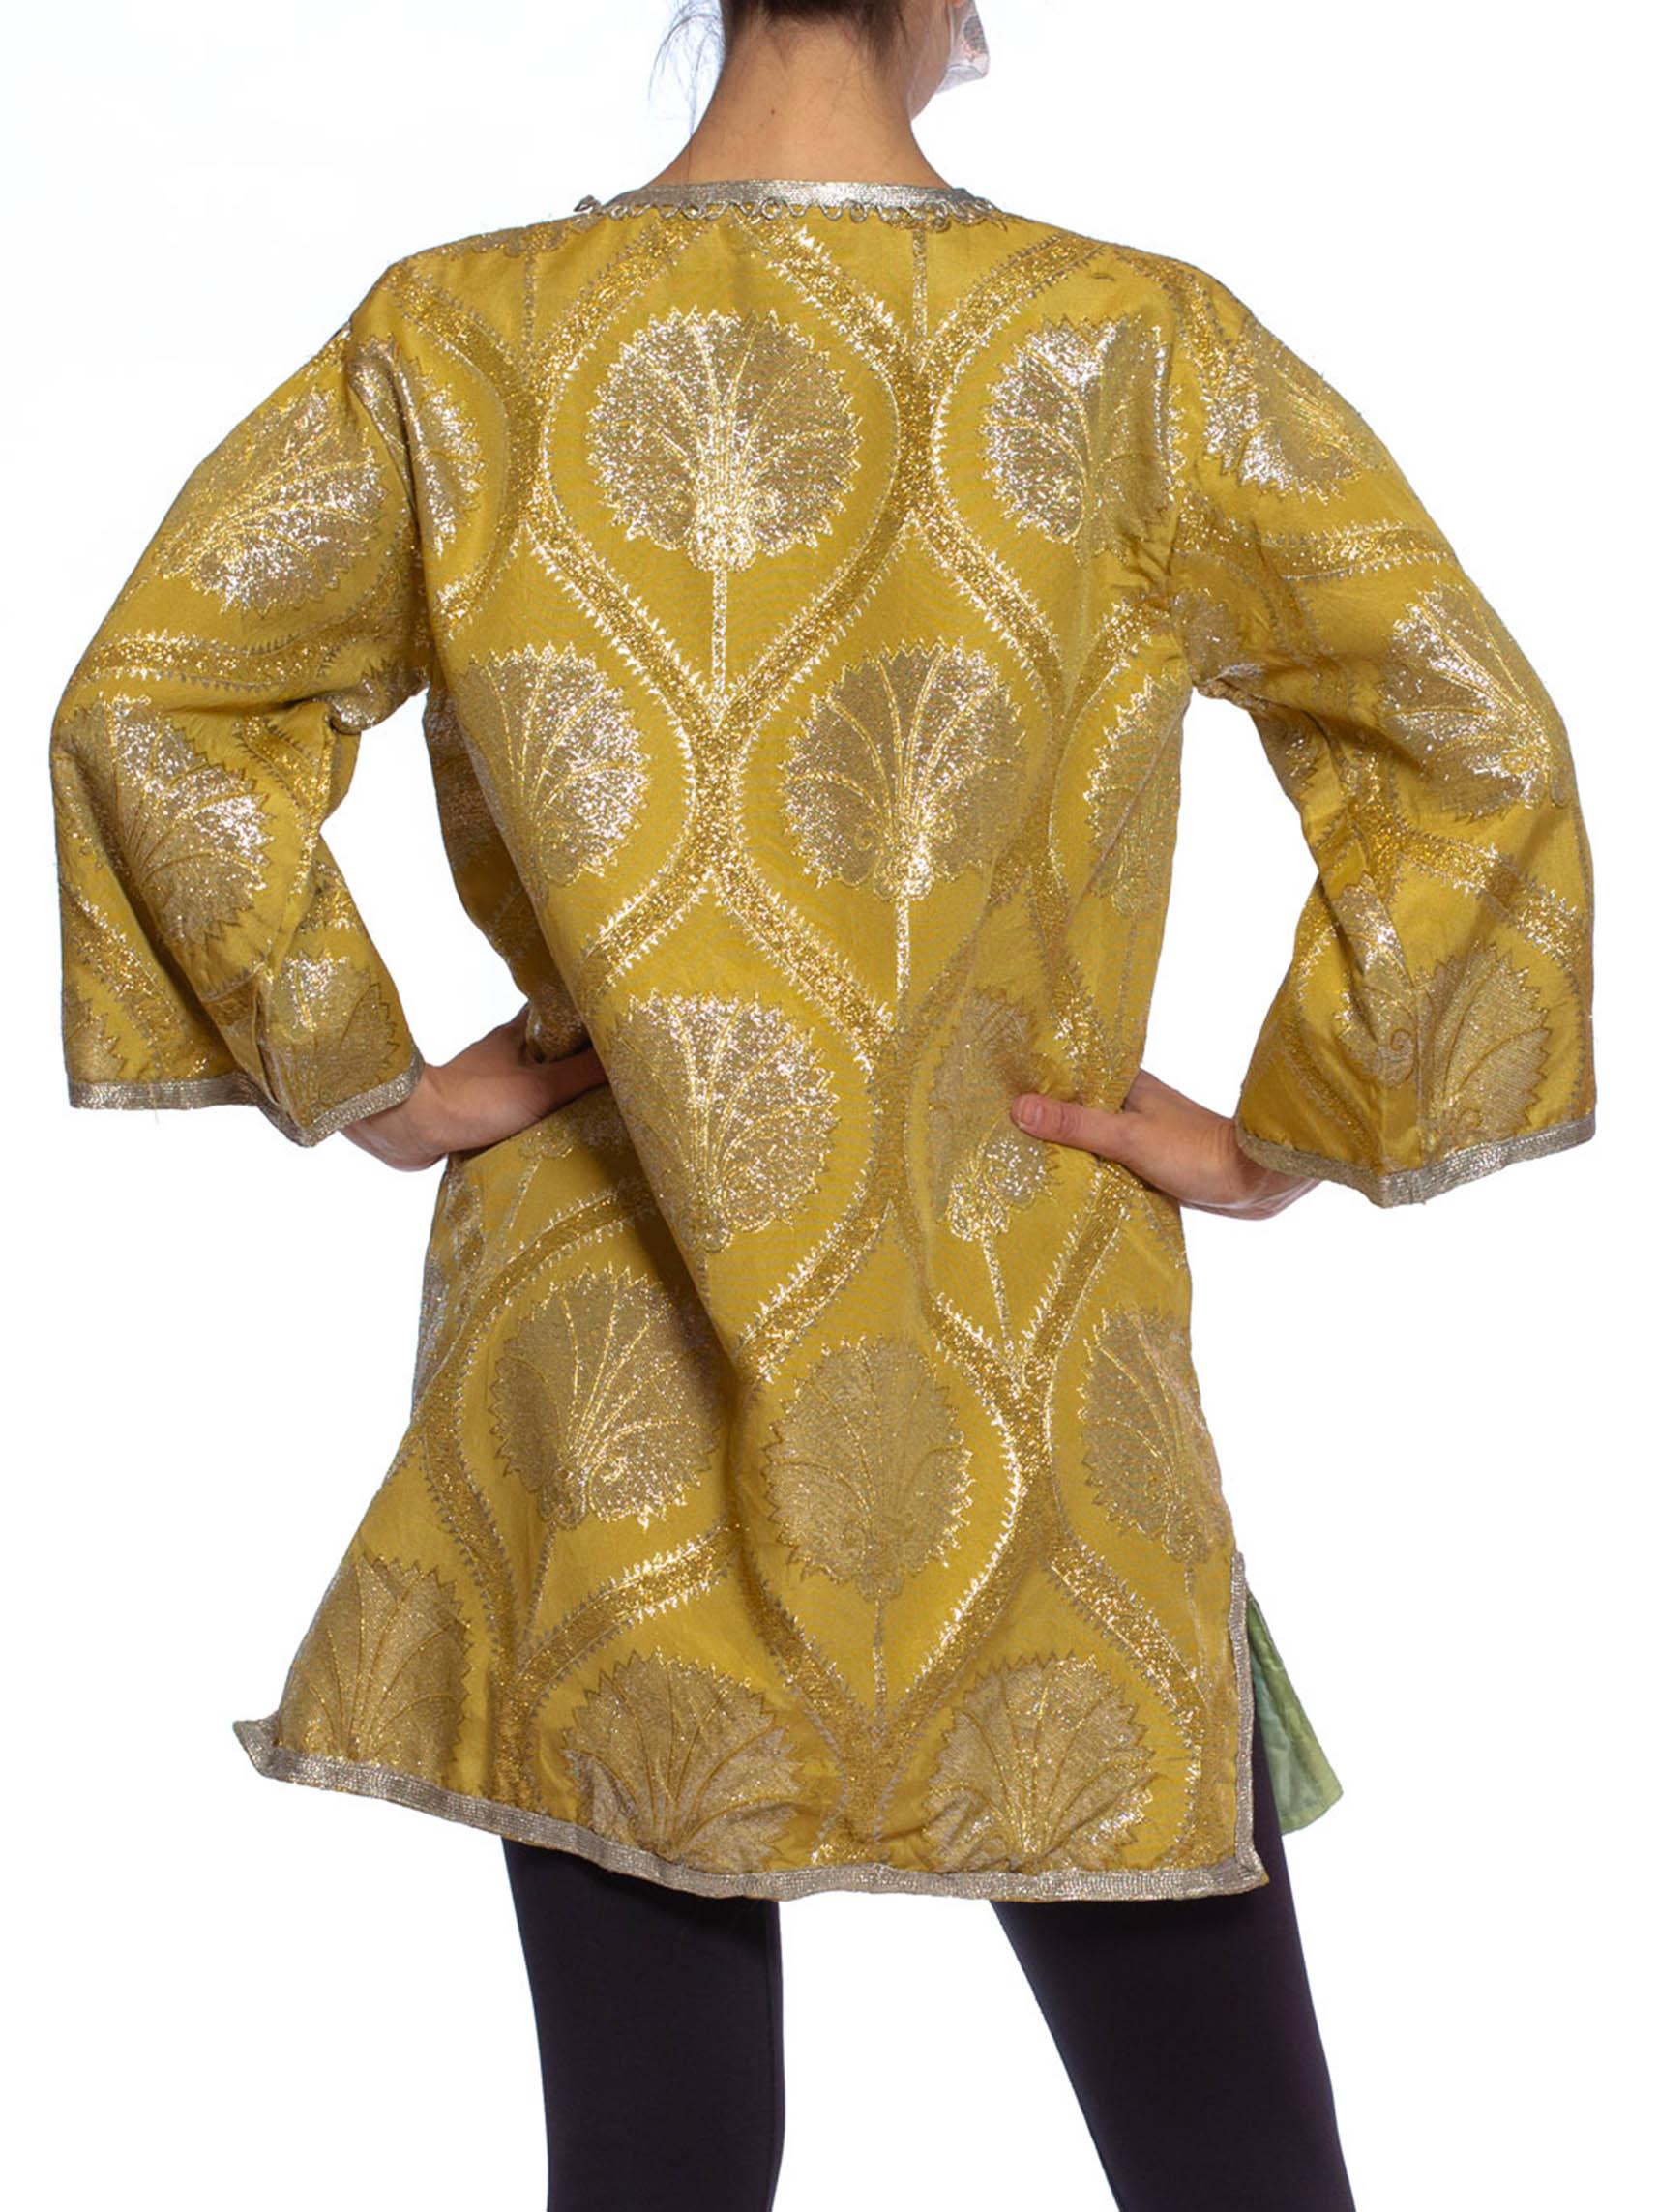 1960S Gold & Silver Metallic Rayon Lurex Damask Kaftan Tunic Jacket With Hand S In Excellent Condition For Sale In New York, NY